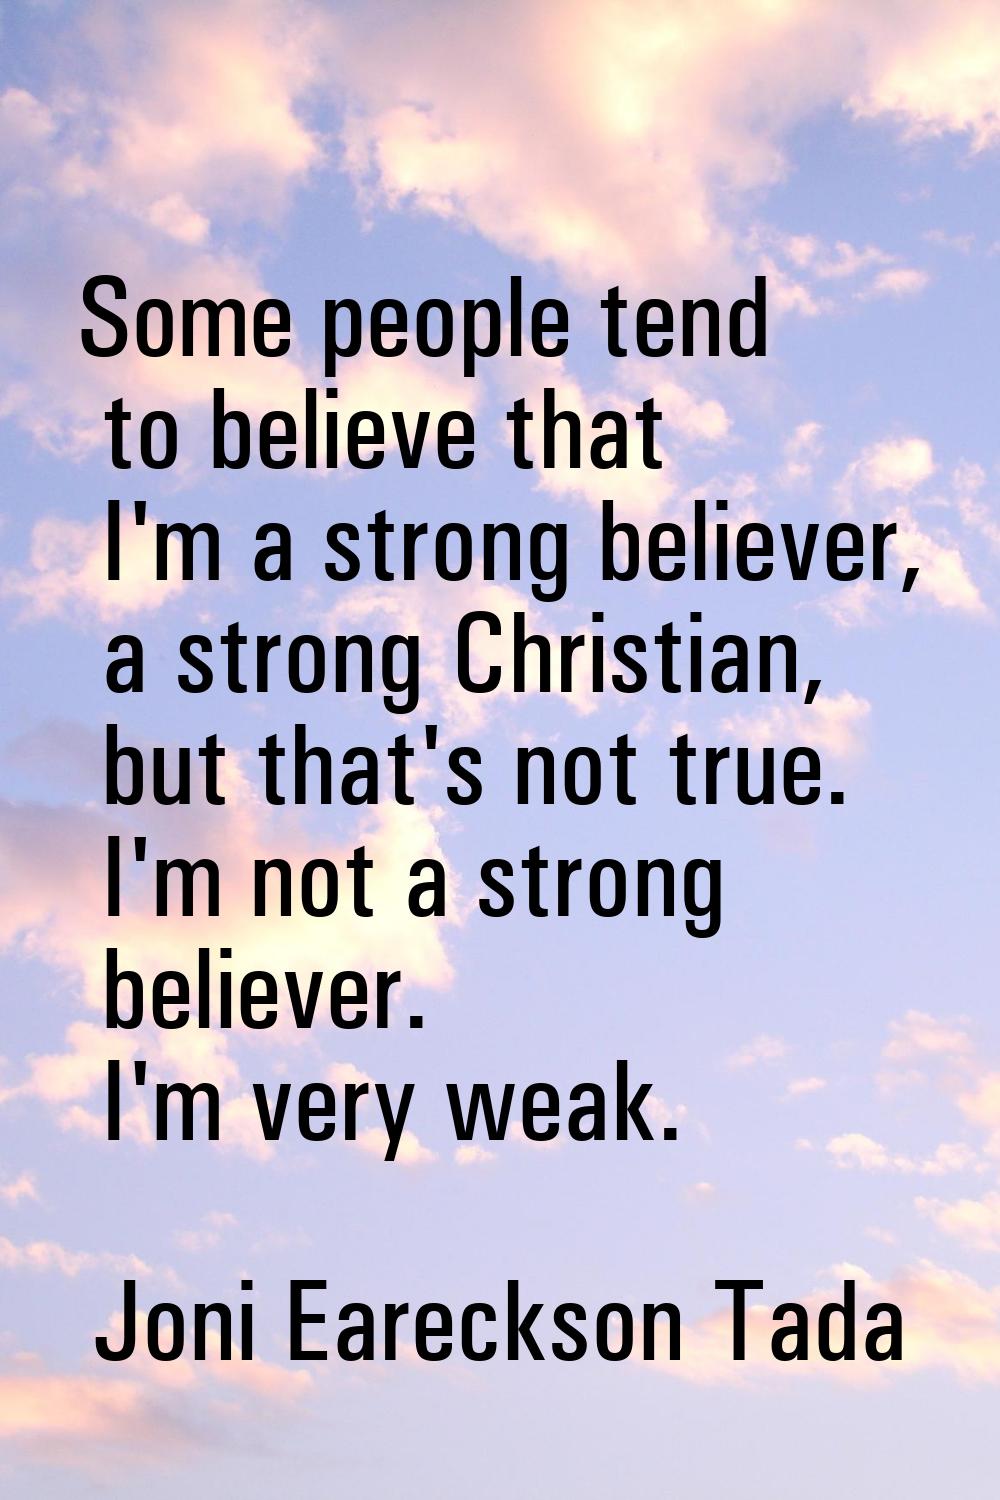 Some people tend to believe that I'm a strong believer, a strong Christian, but that's not true. I'